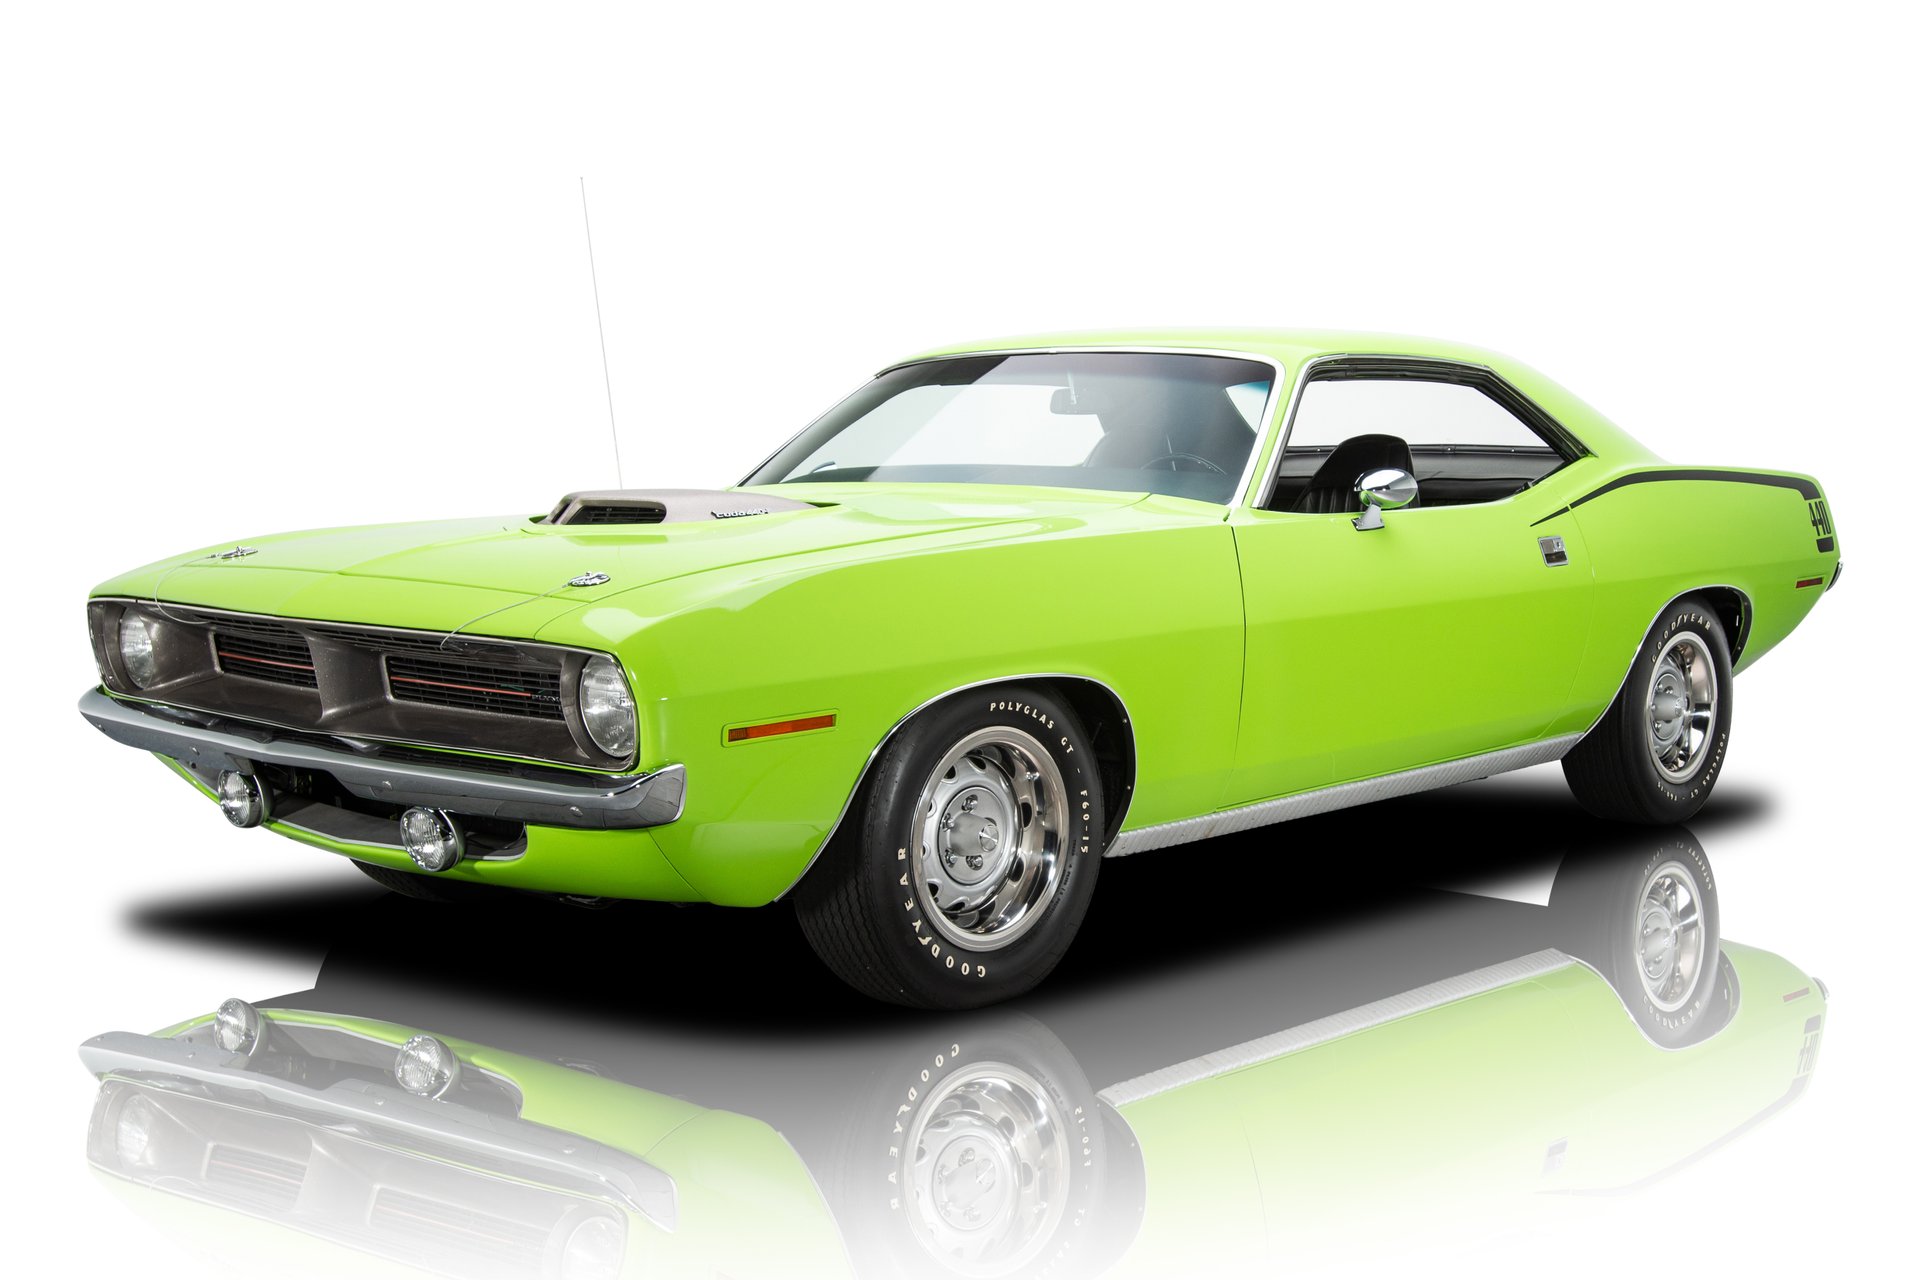 1970 Plymouth Cuda Rk Motors Classic Cars And Muscle Cars For Sale